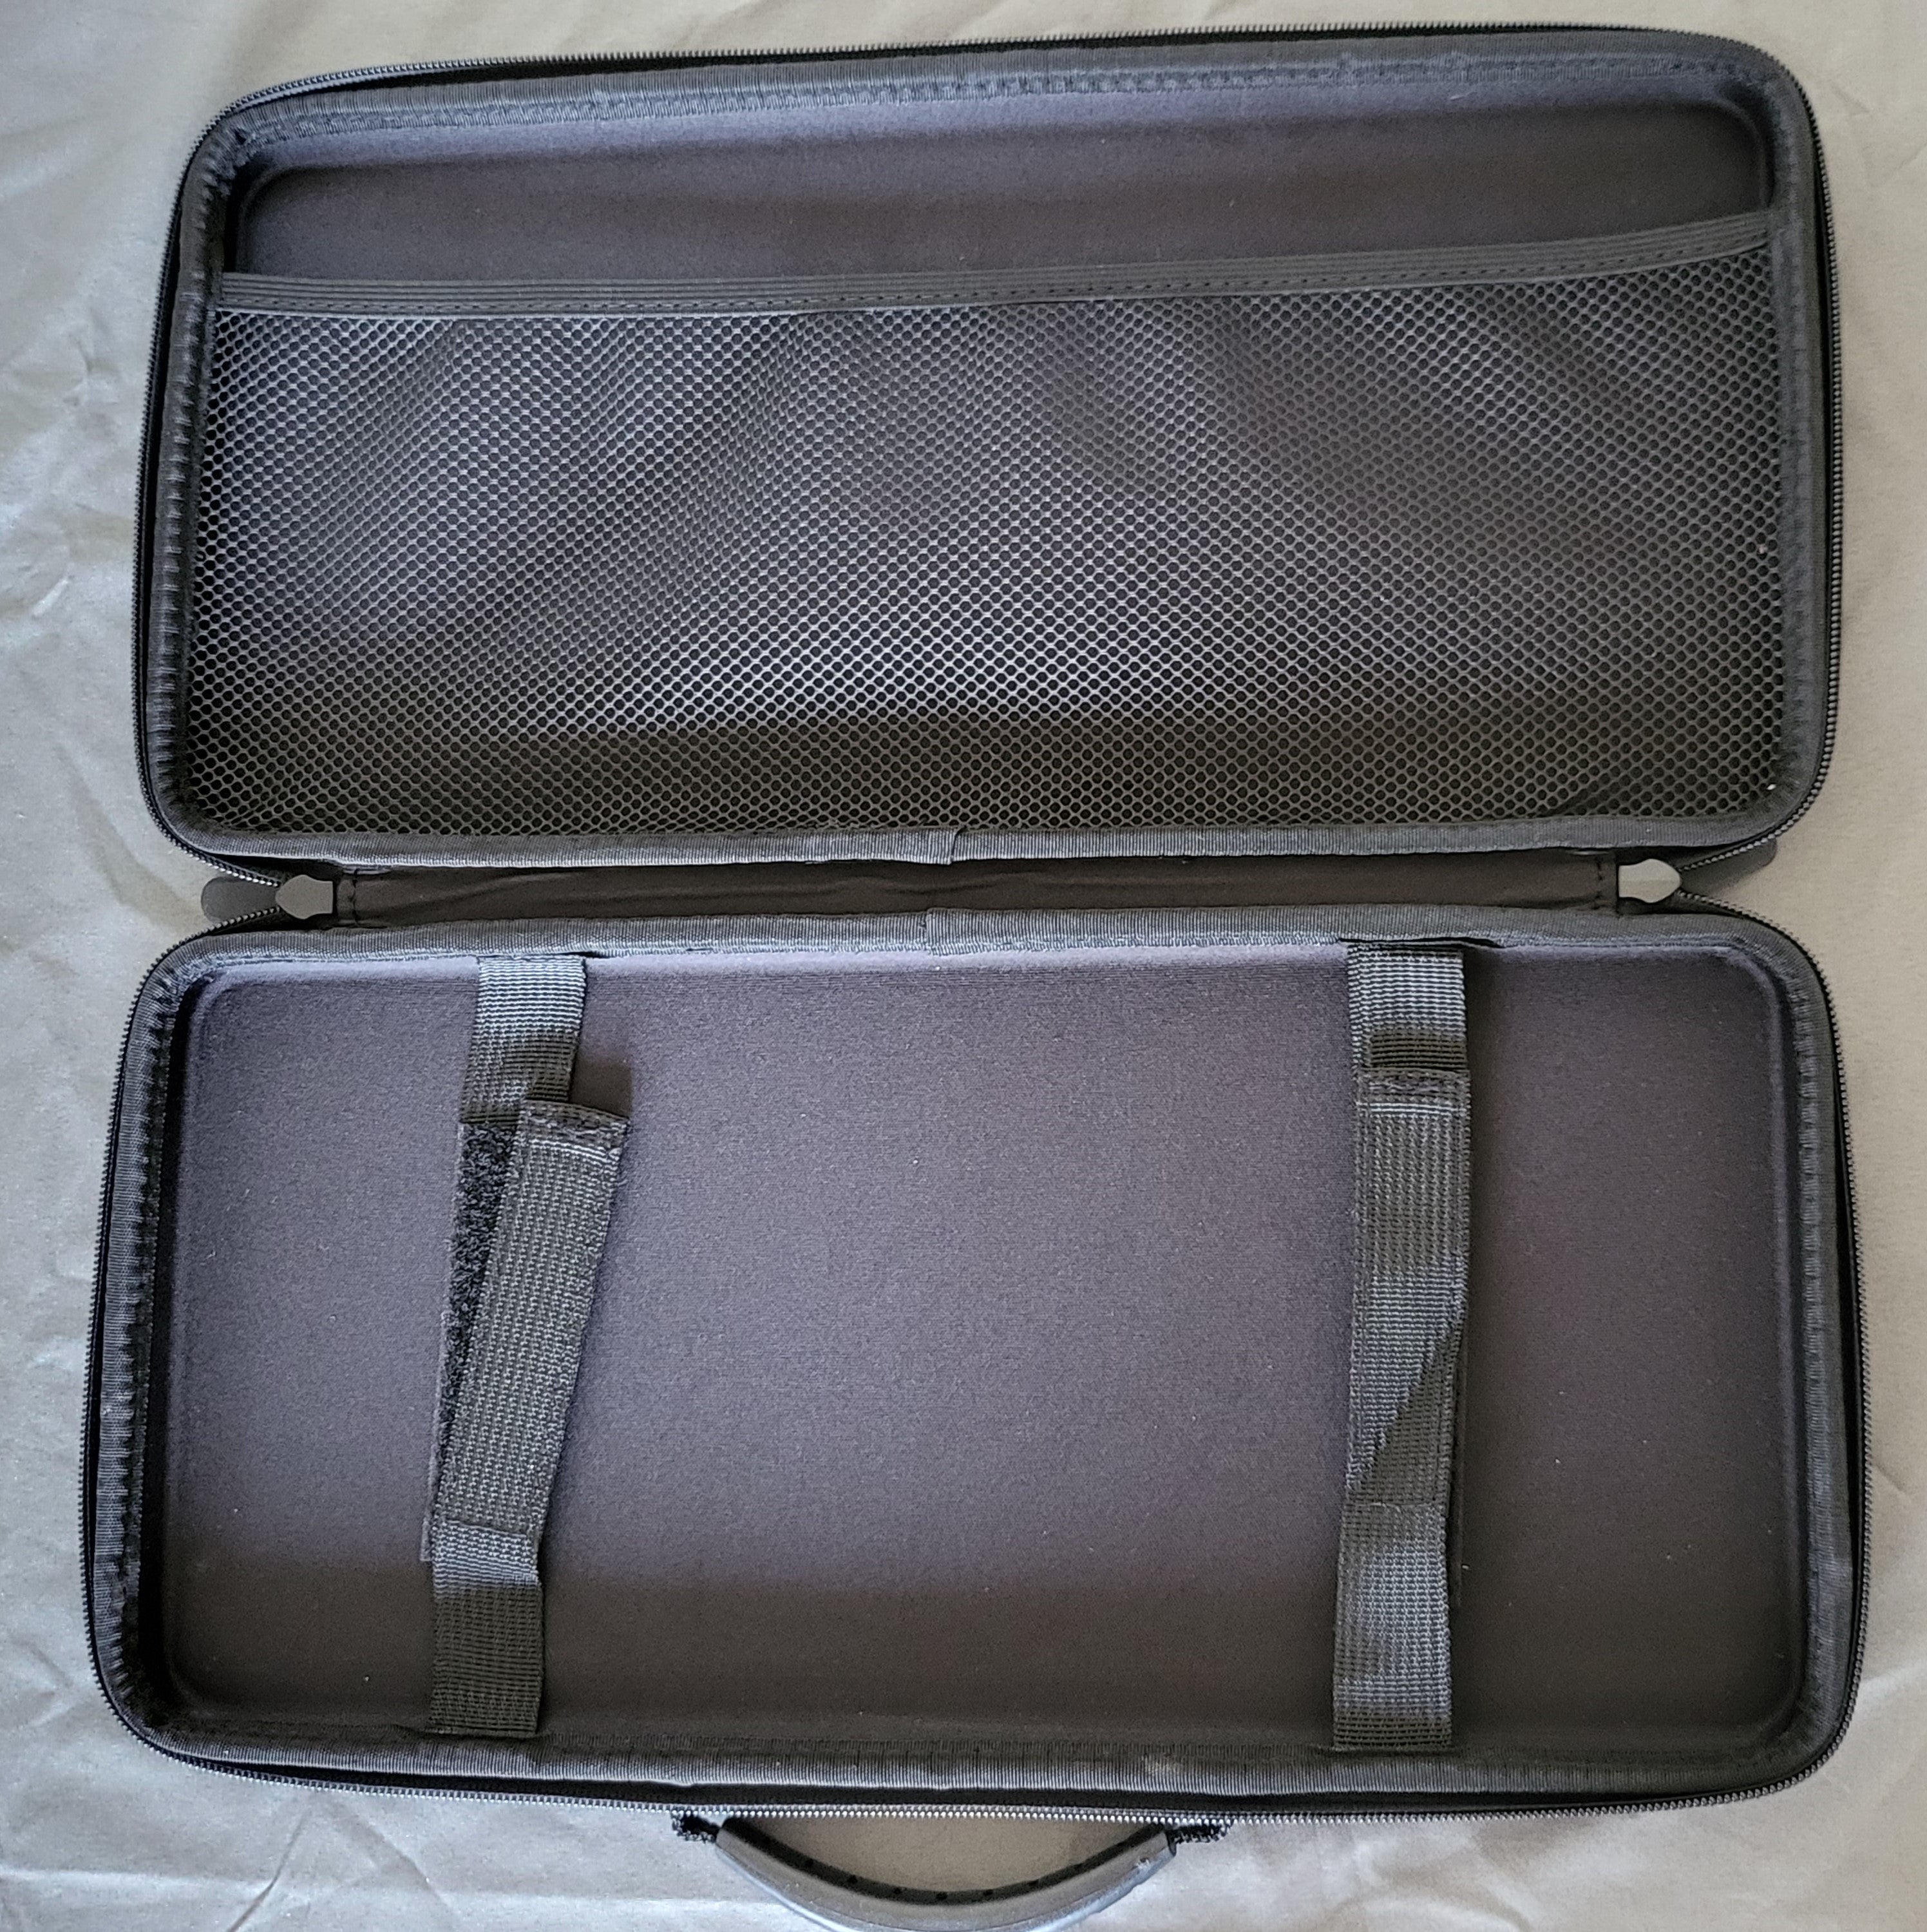 Frame1 Carrying Case